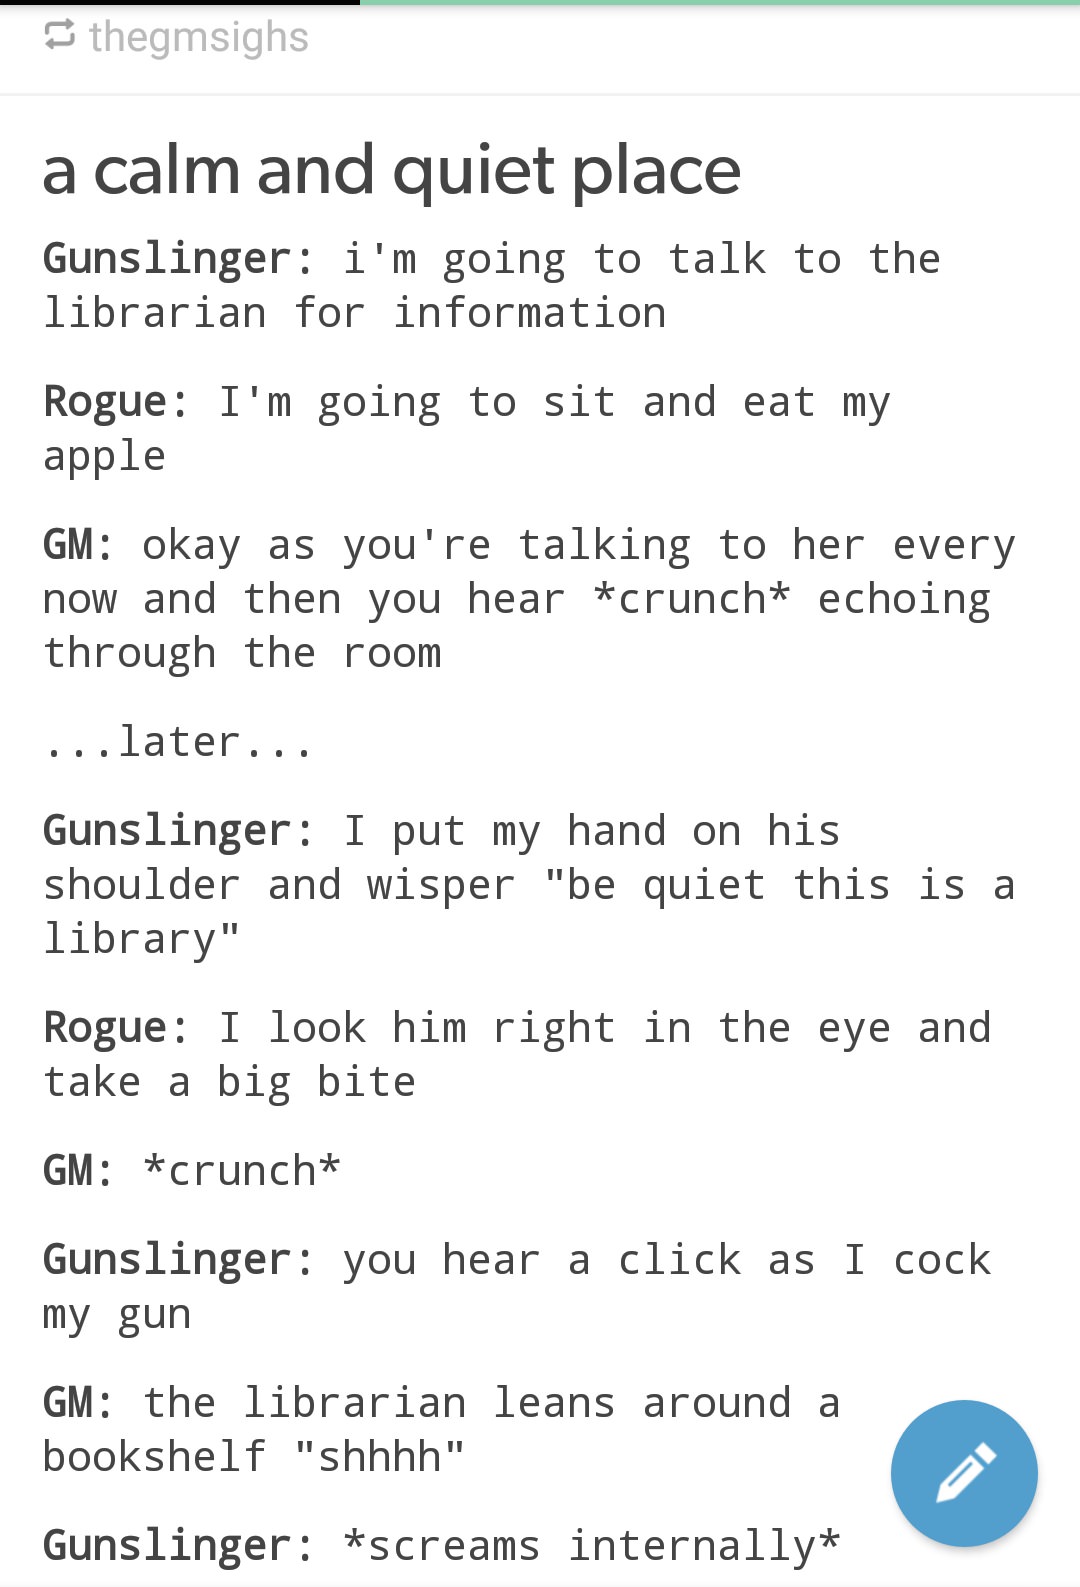 document - thegmsighs a calm and quiet place Gunslinger i'm going to talk to the librarian for information Rogue I'm going to sit and eat my apple Gm okay as you're talking to her every now and then you hear crunch echoing through the room ...later... Gun